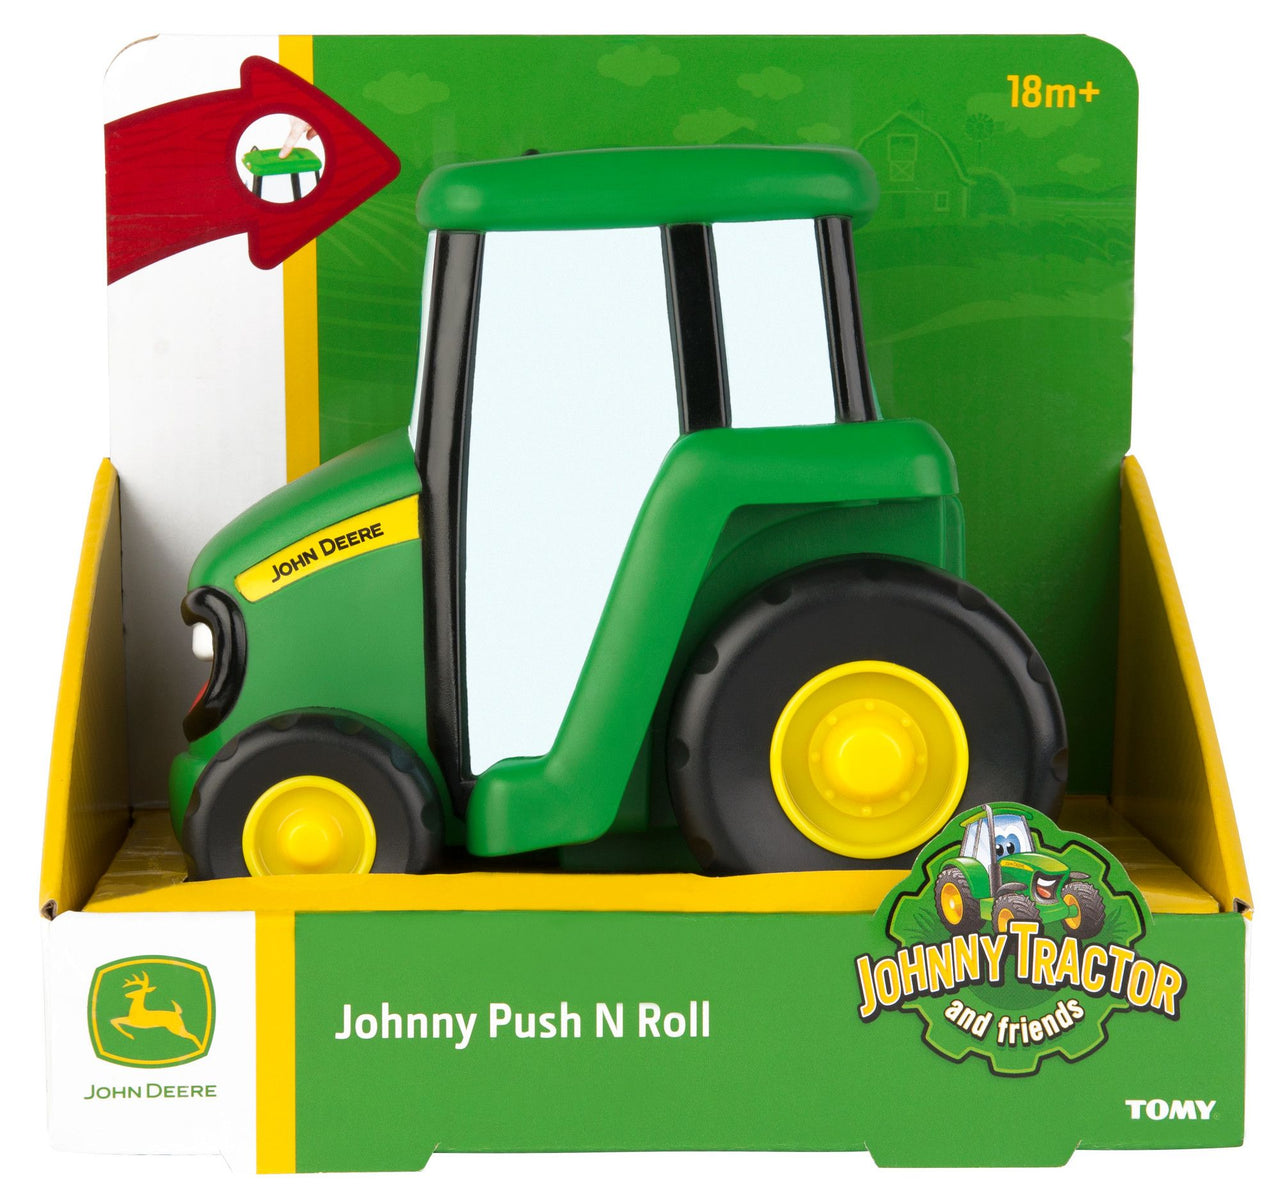 JOHN DEERE - Push and Roll Johnny Tractor